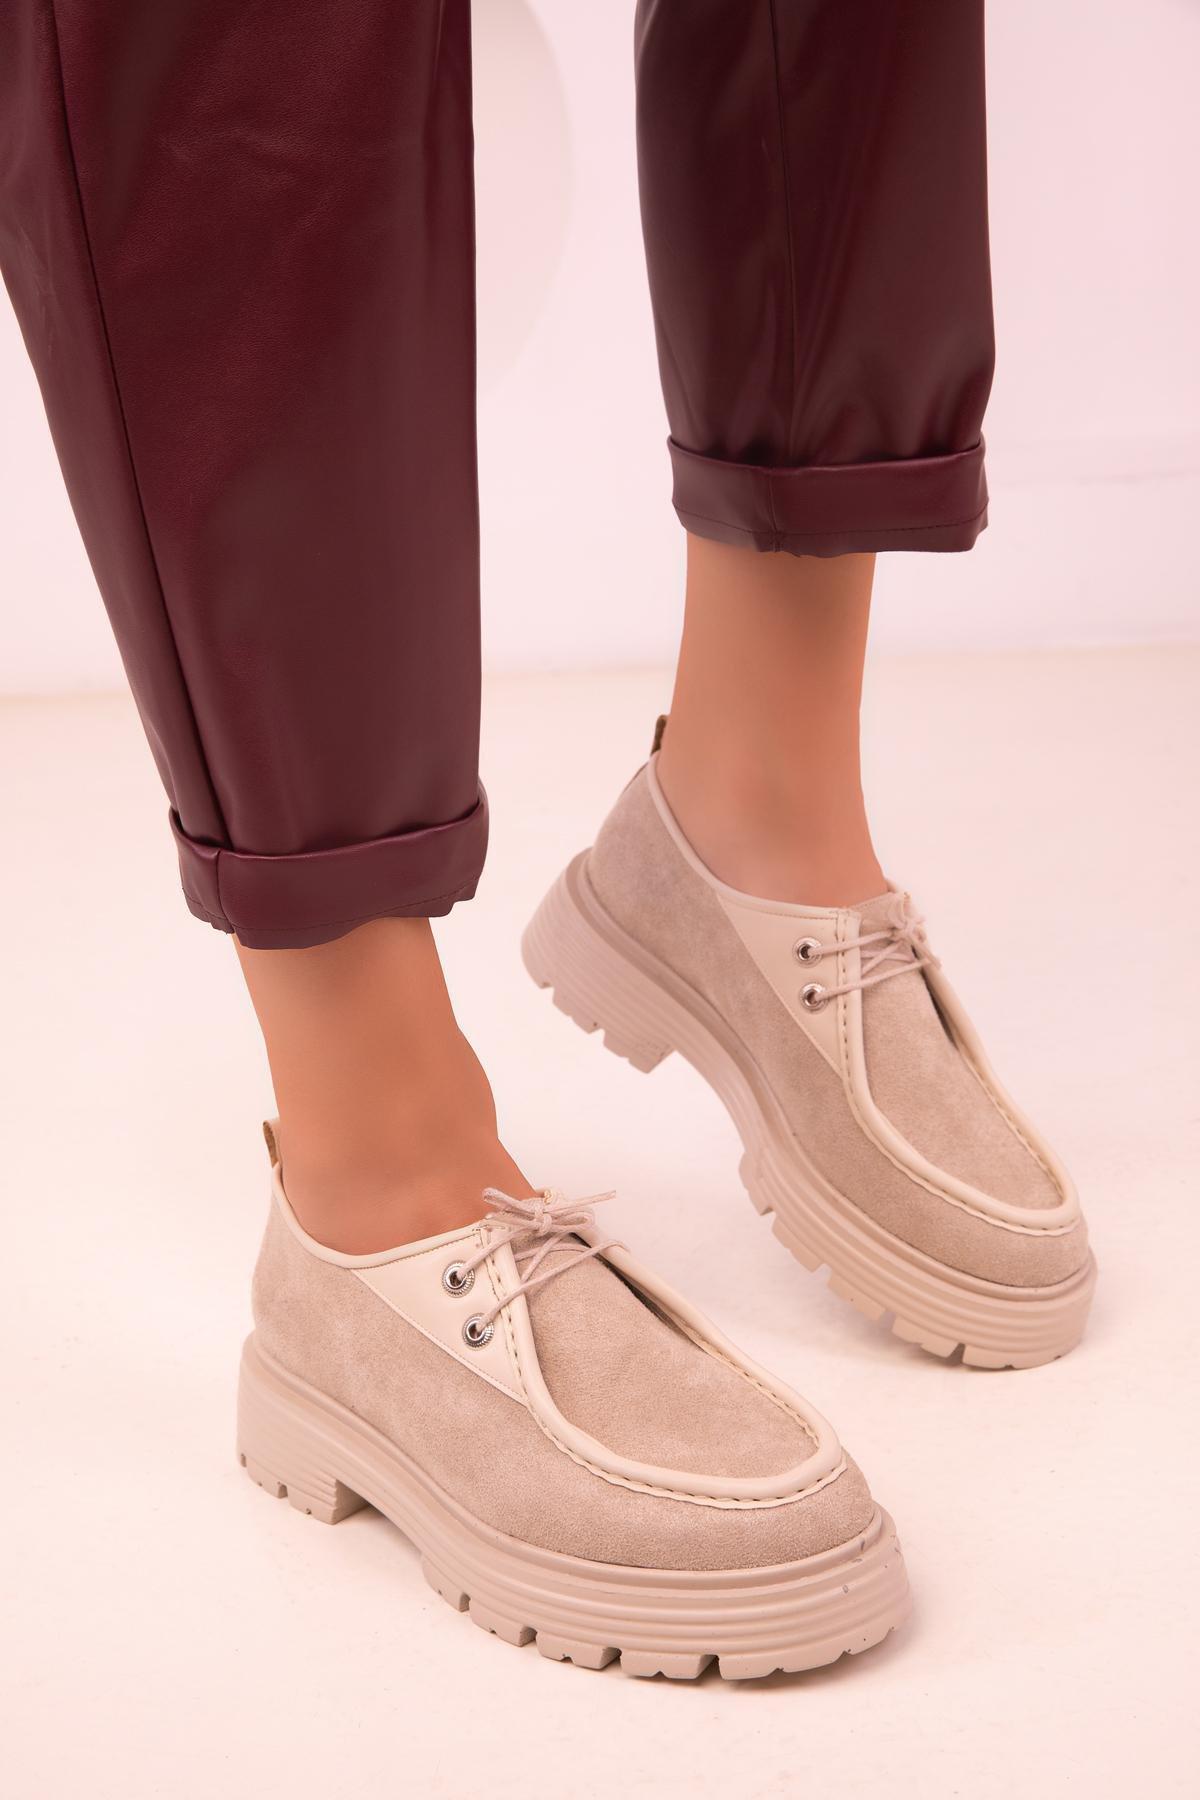 SOHO - Beige Lace-Up Suede Casual Shoes